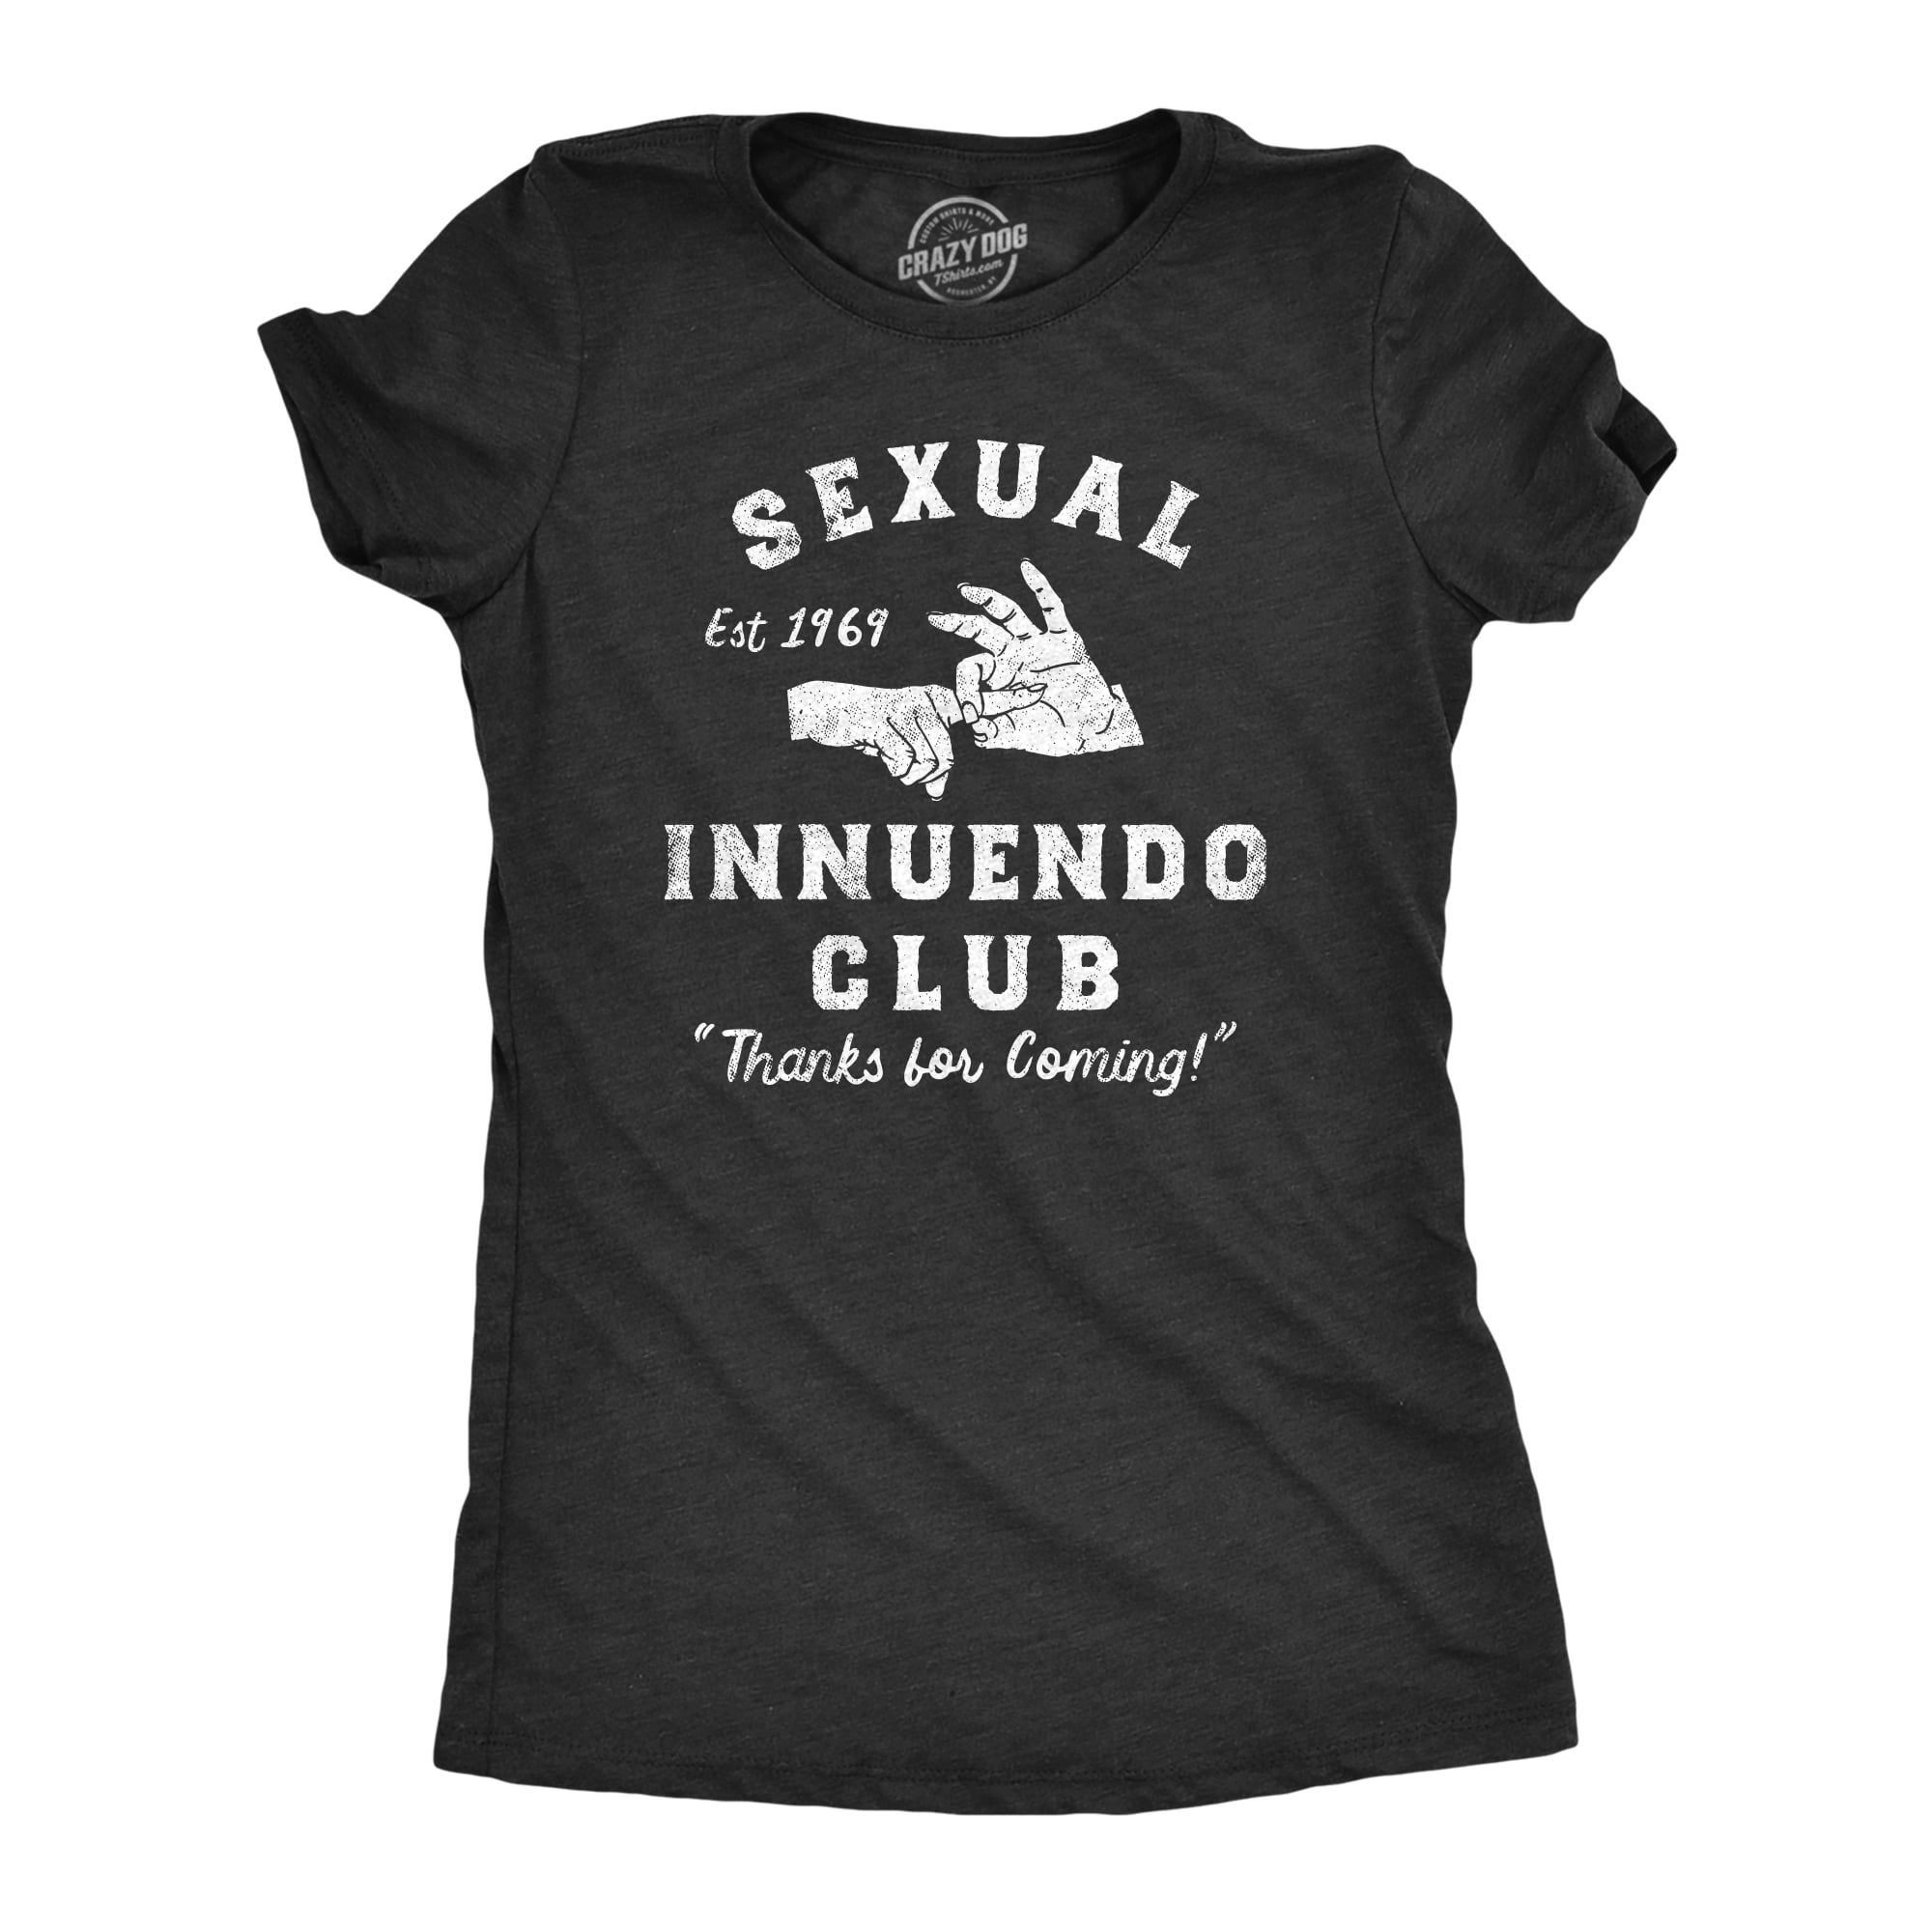 Womens Sexual Innuendo Club Thanks For Coming T Shirt Funny Sex Joke Tee For Ladies (Heather Black - INNUENDO) - S Womens Graphic Tees image